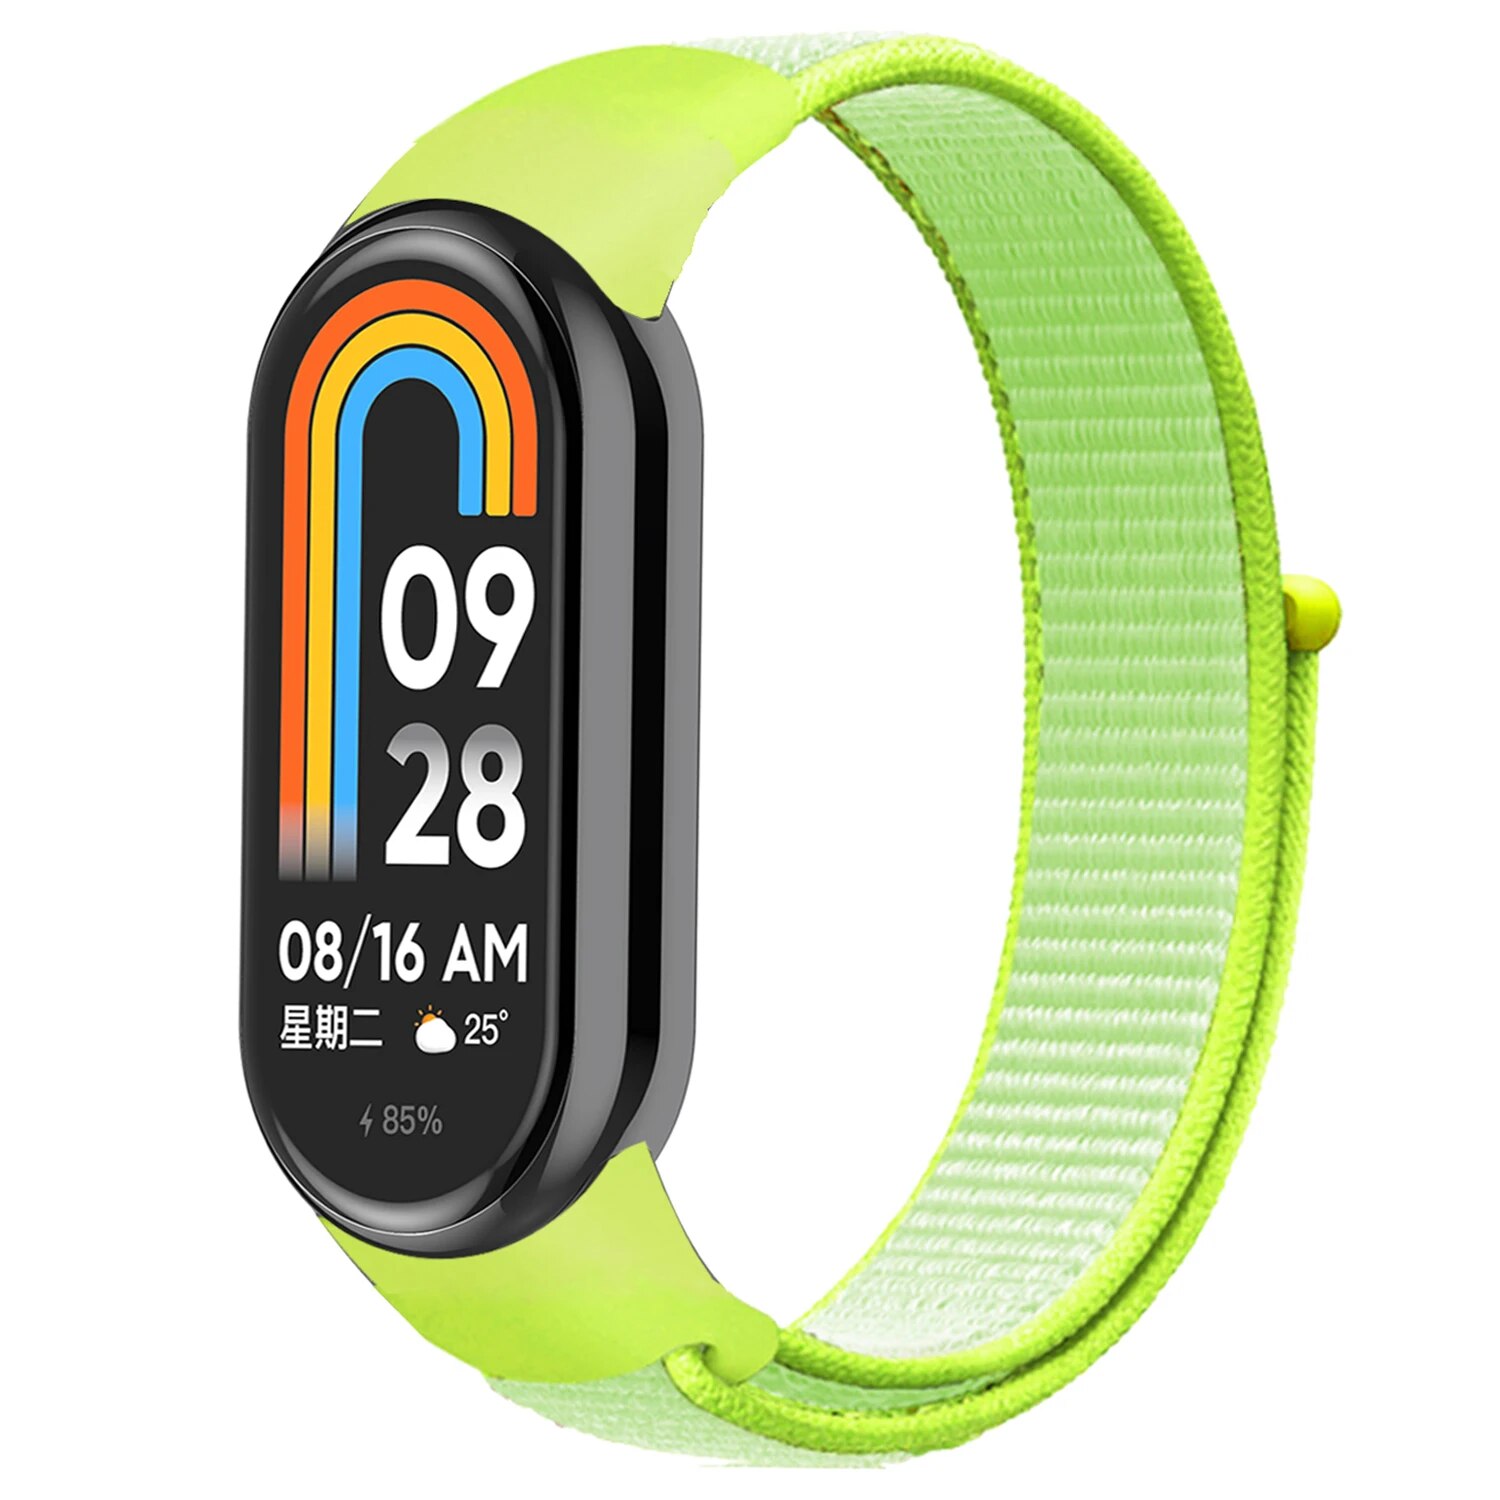 Nylon Loop for xiaomi Mi Band 8 Strap SmartWatch Wristband Correa  Replacement sport pulsera watchband for Miband 8 NFC Bracelet